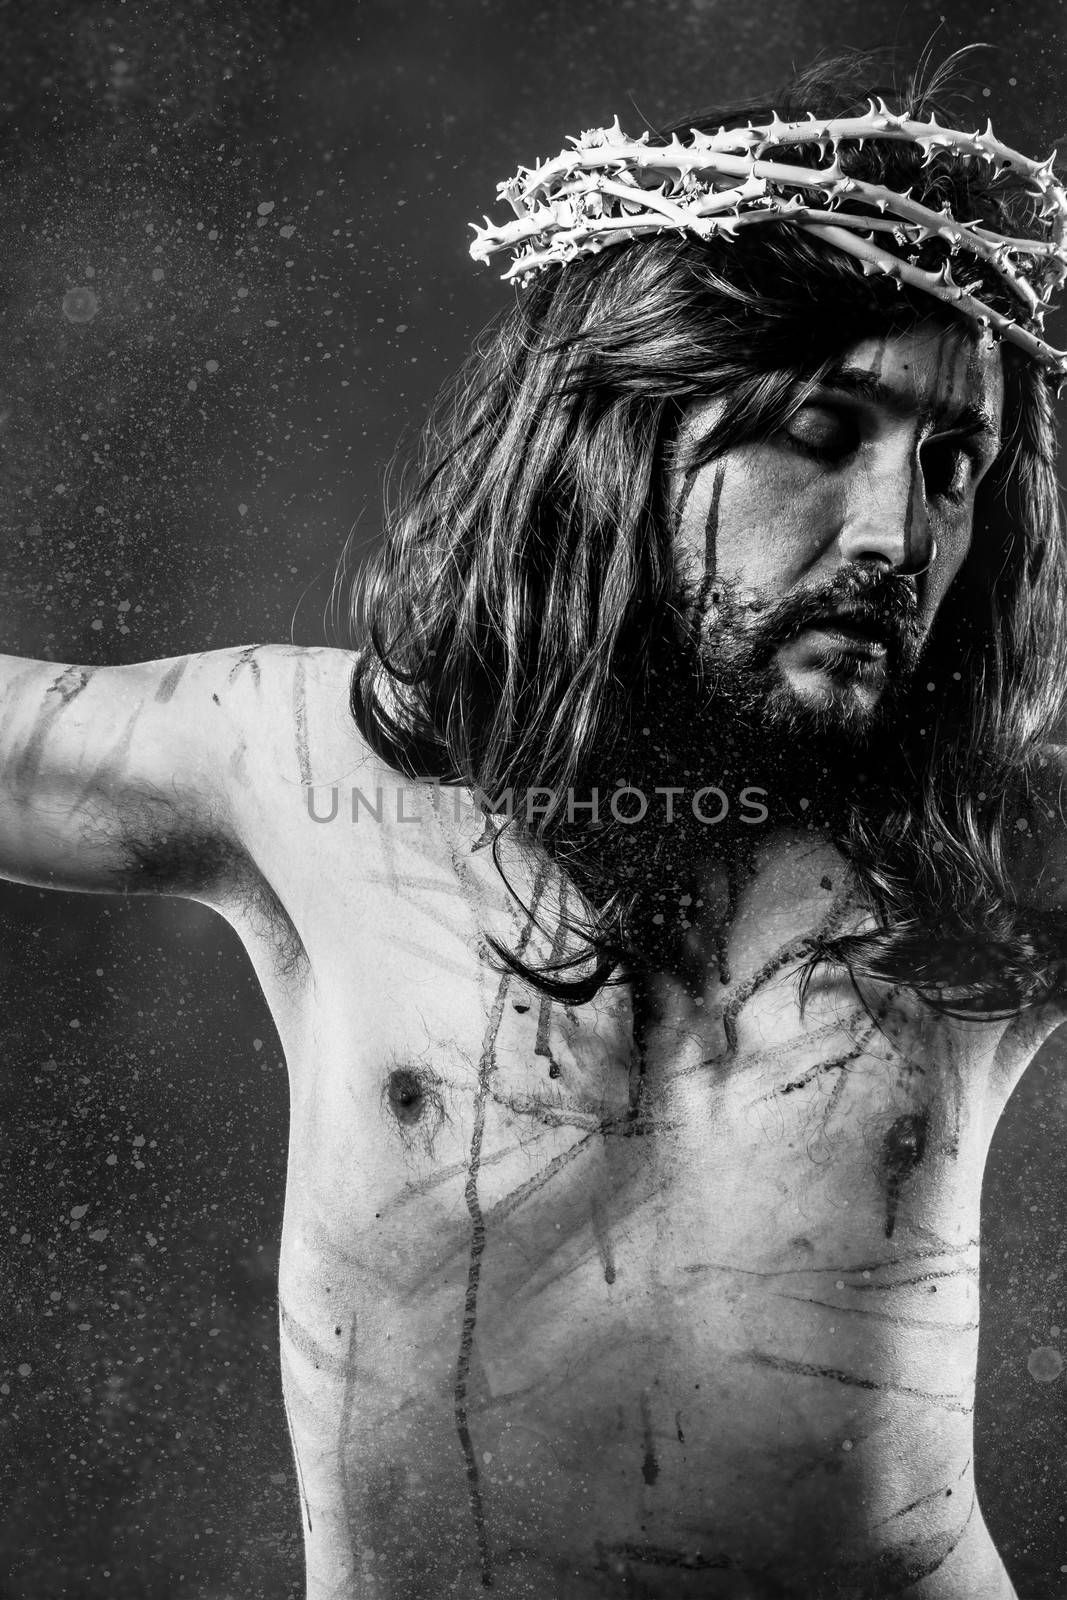 Jesus Christ calvary, man bleeding, representation of passion with crown of thorns